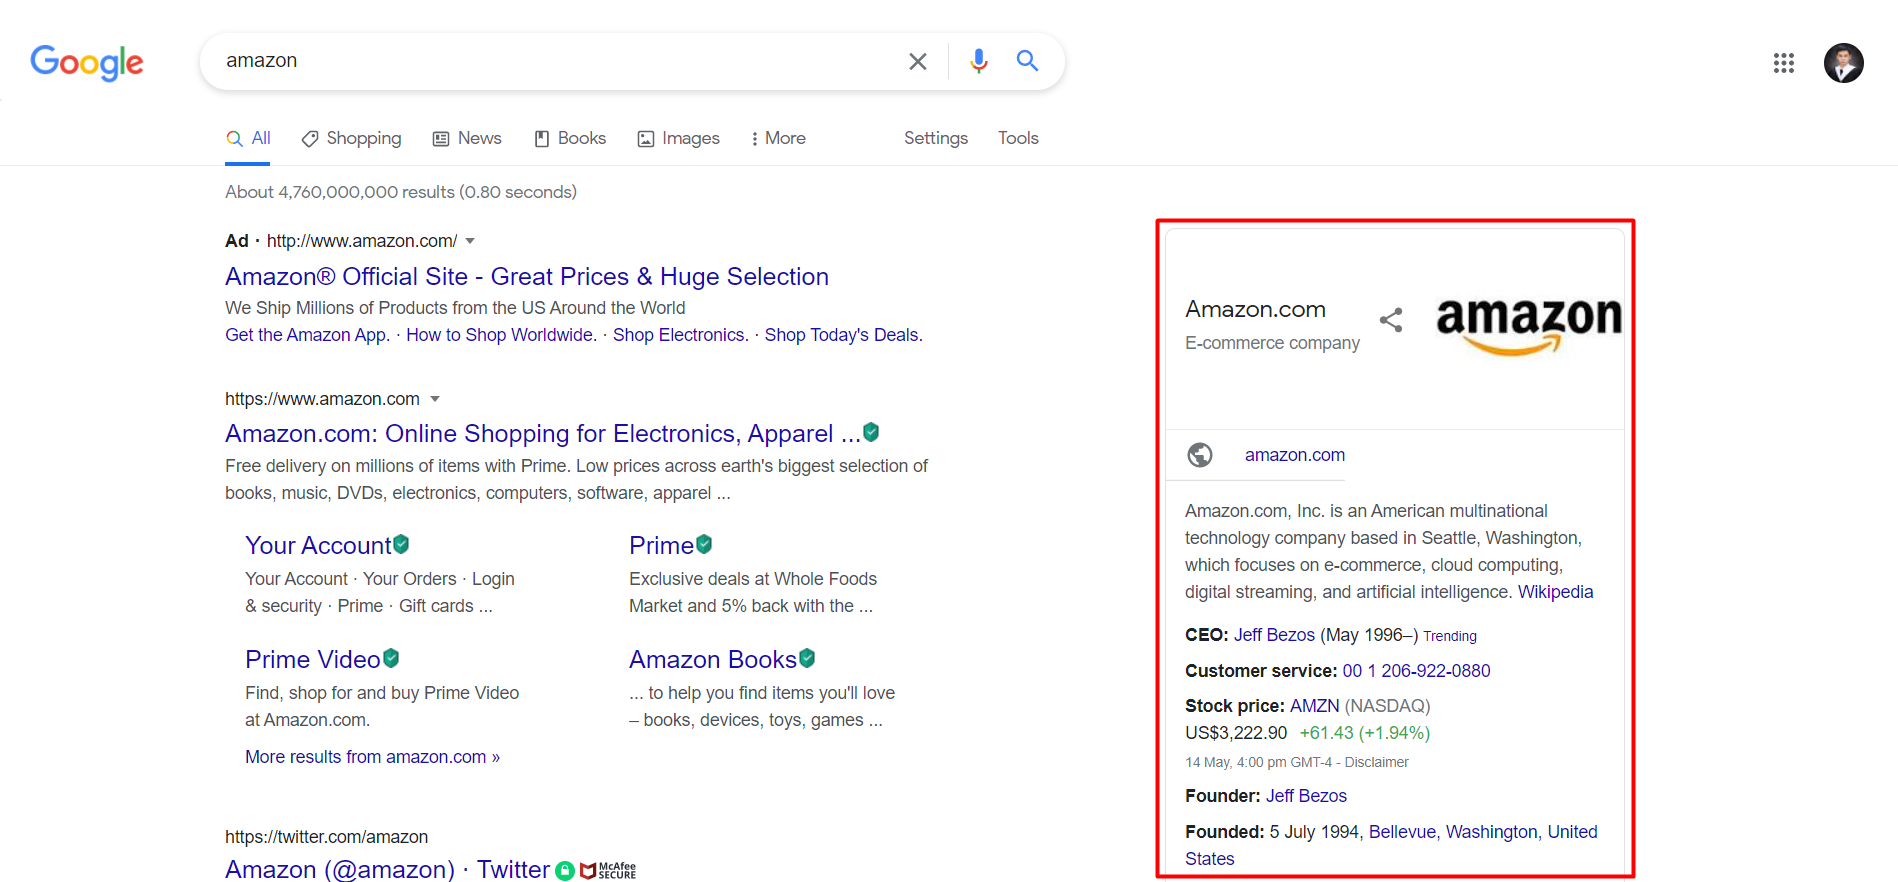 Difference Between Keywords and Entities Information box on the entity “amazon” created by Google’s Knowledge Graph